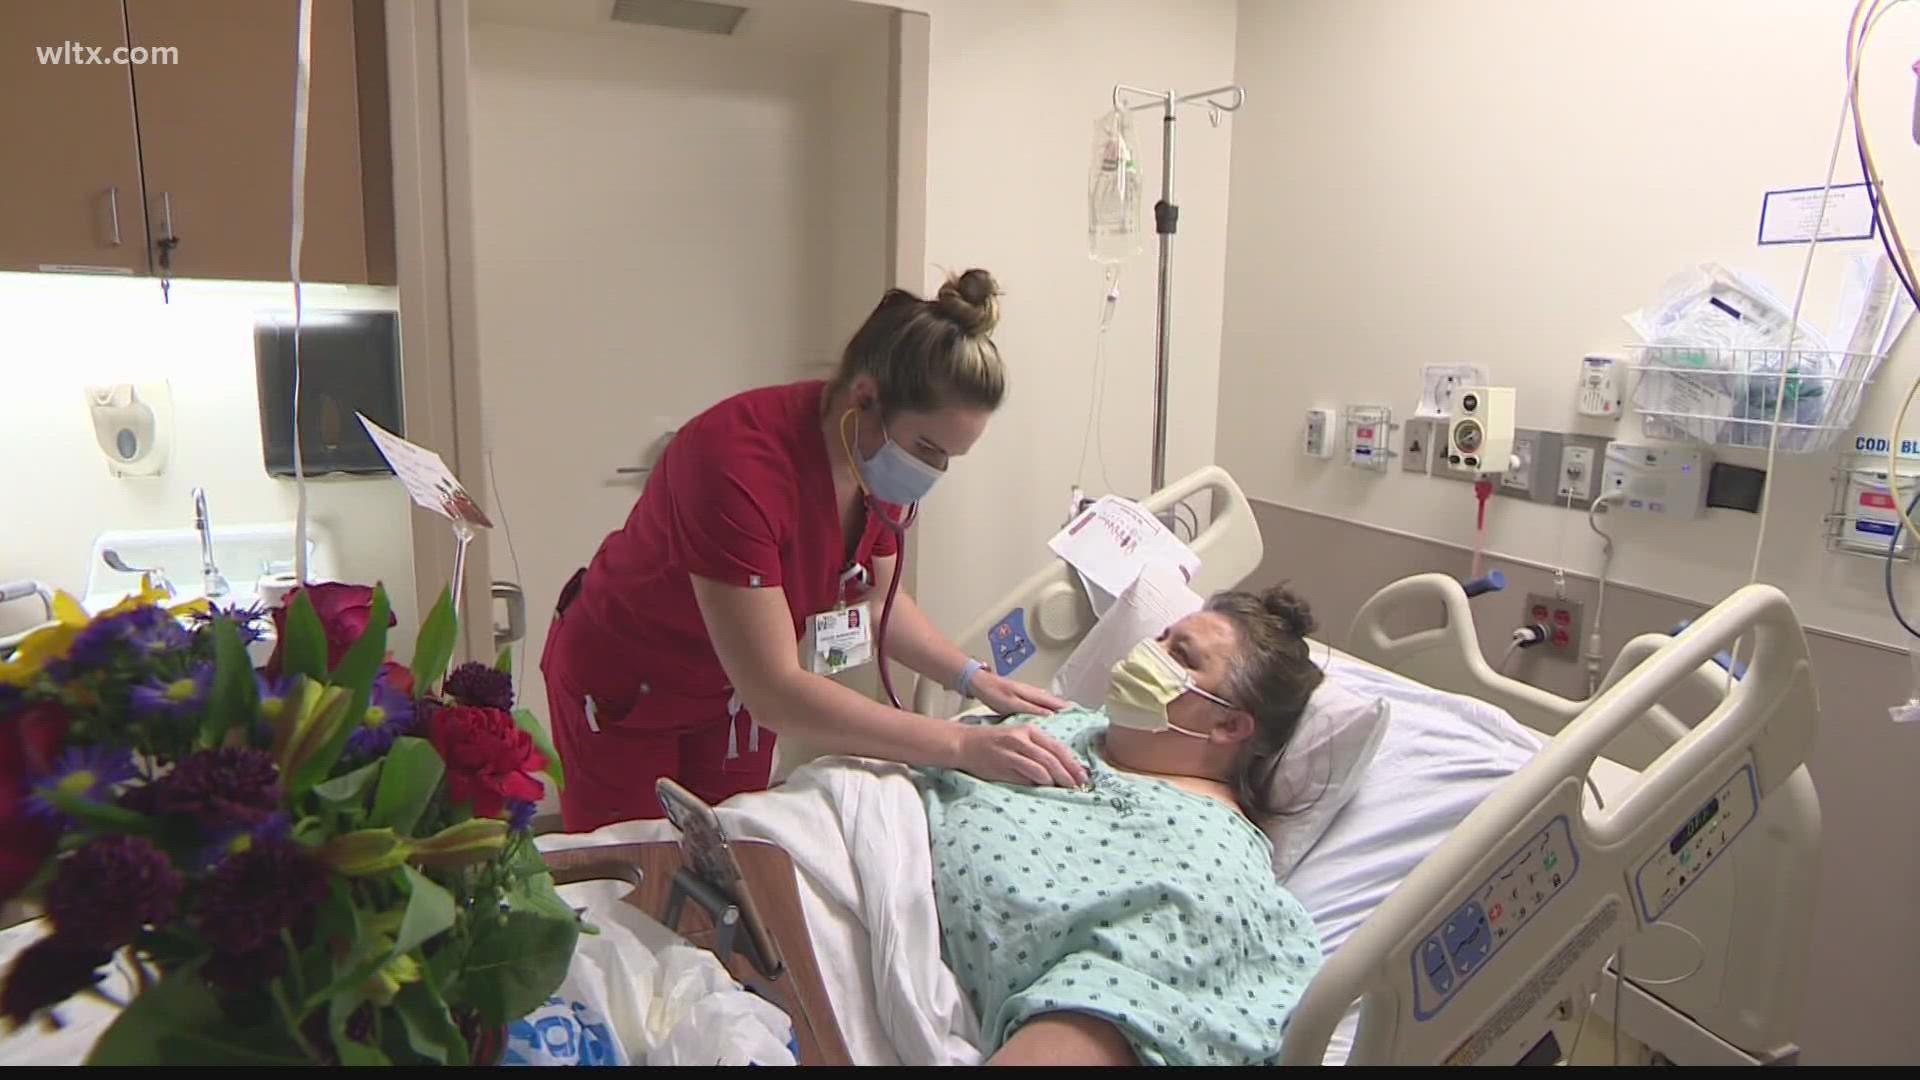 More nursing programs to help increase the amount of nurses in the state.